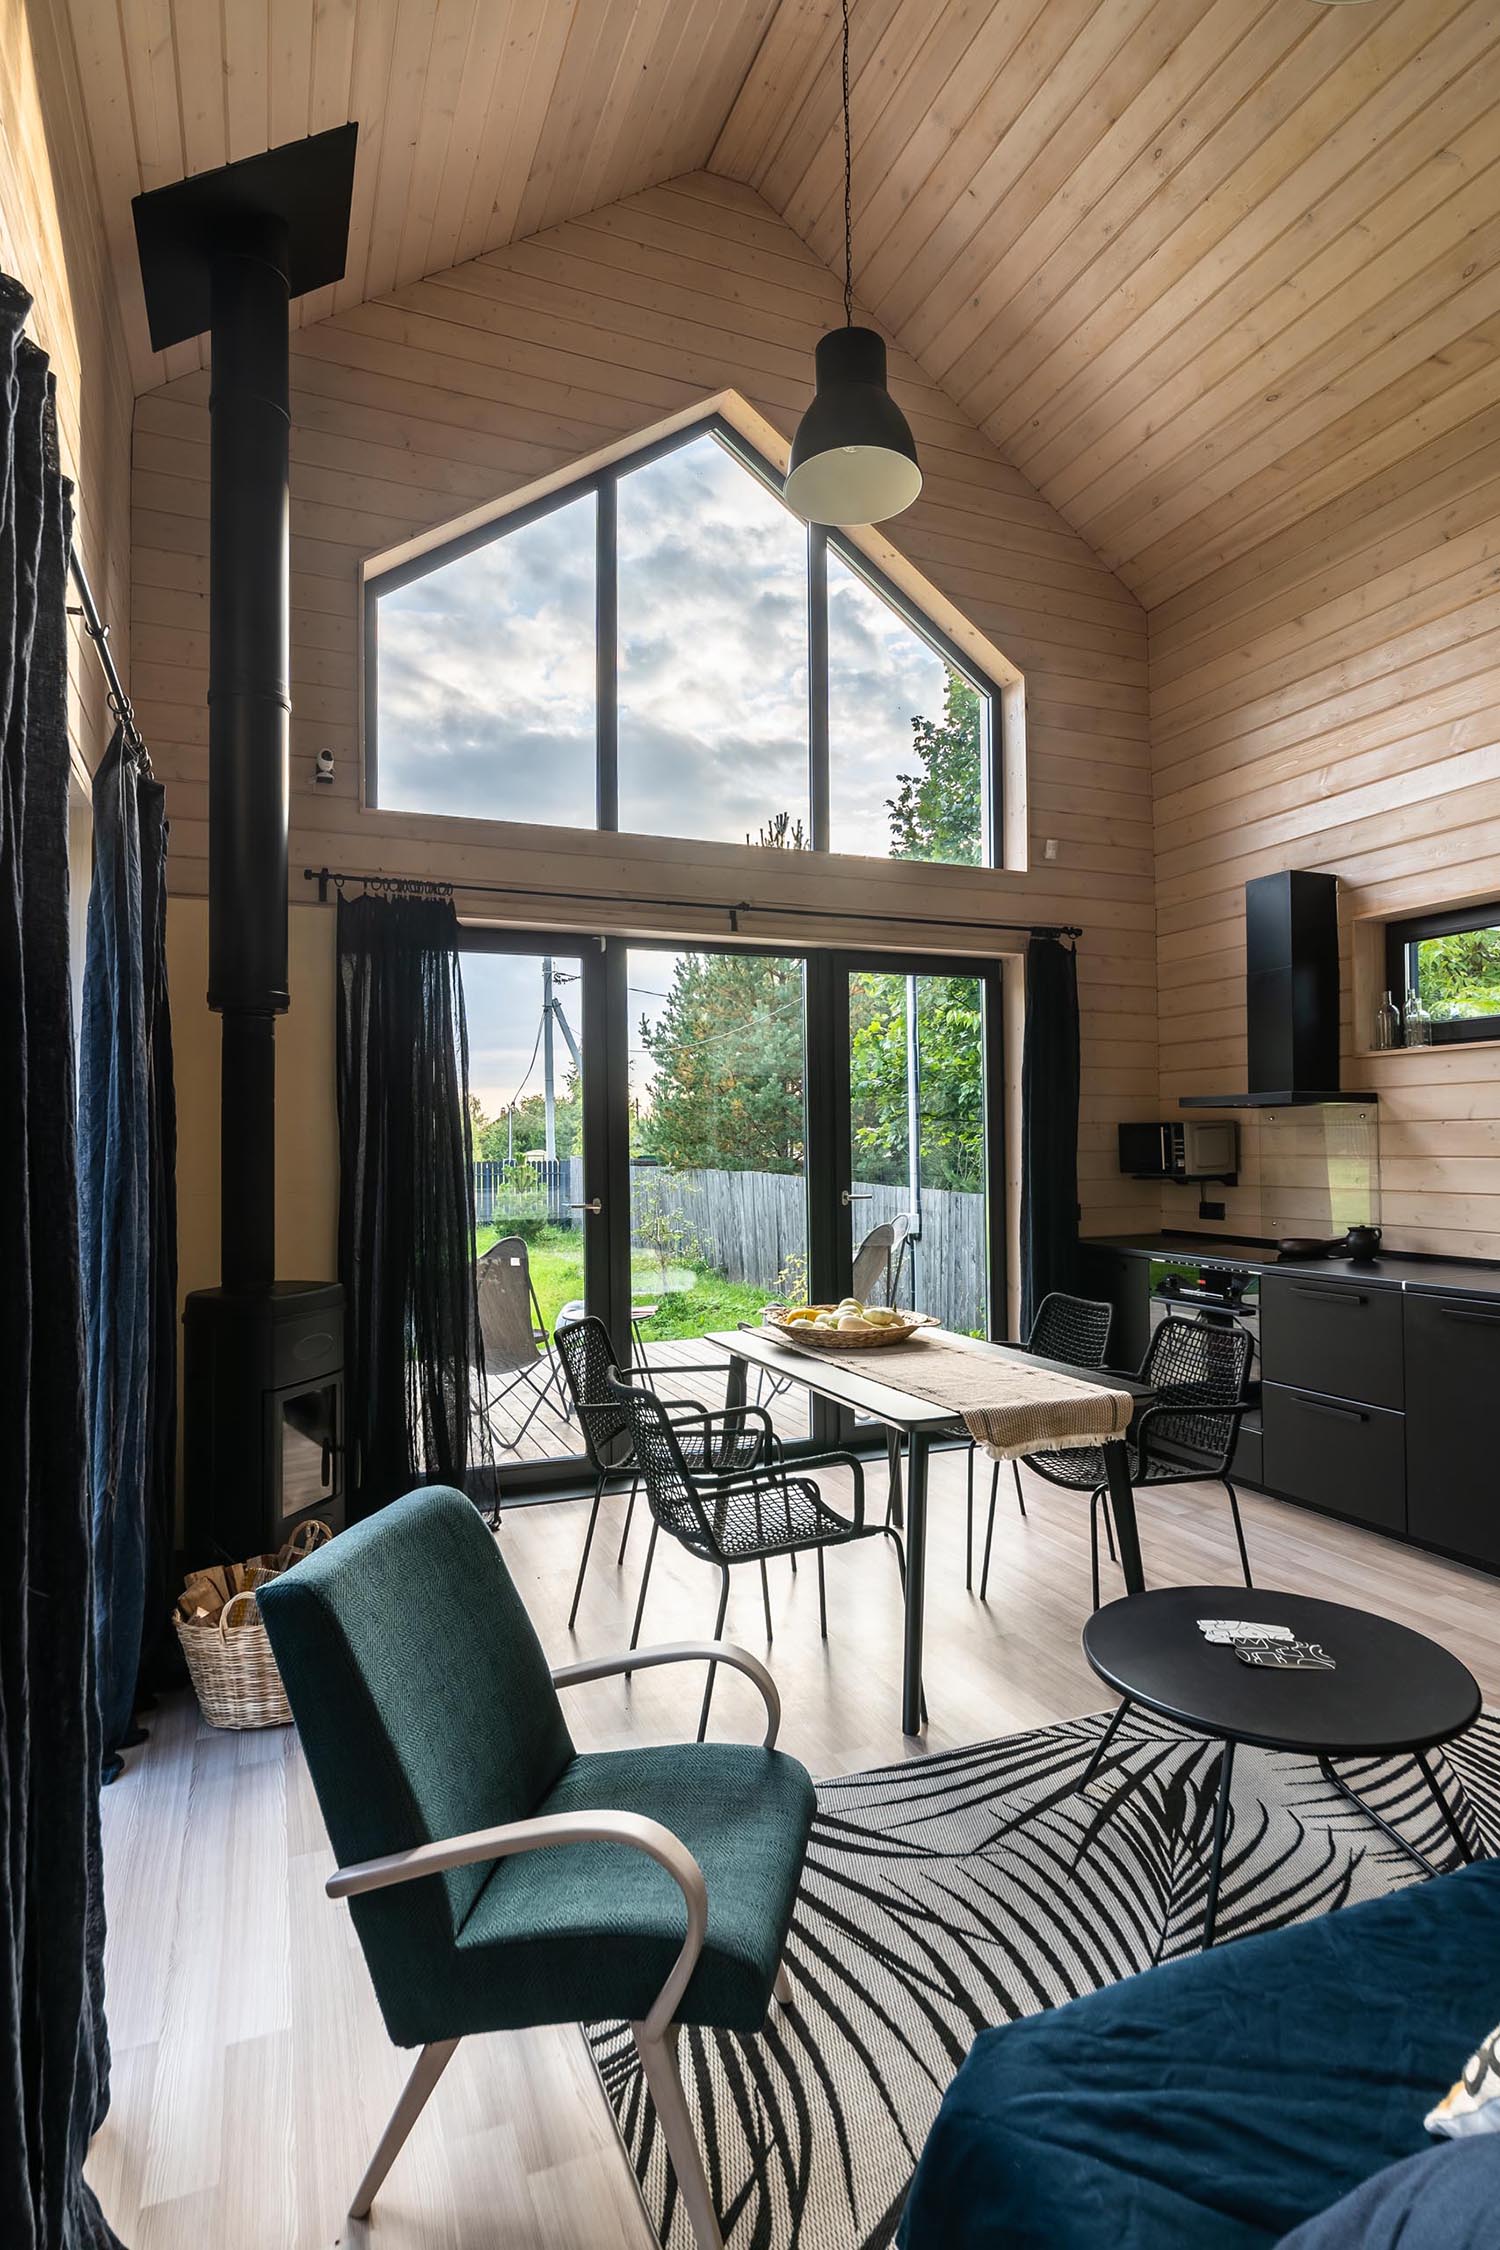 A modern barn-inspired open plan dining area and kitchen with tongue and groove wood siding and black accents, like the kitchen cabinets, the fireplace, the curtains, and furniture.